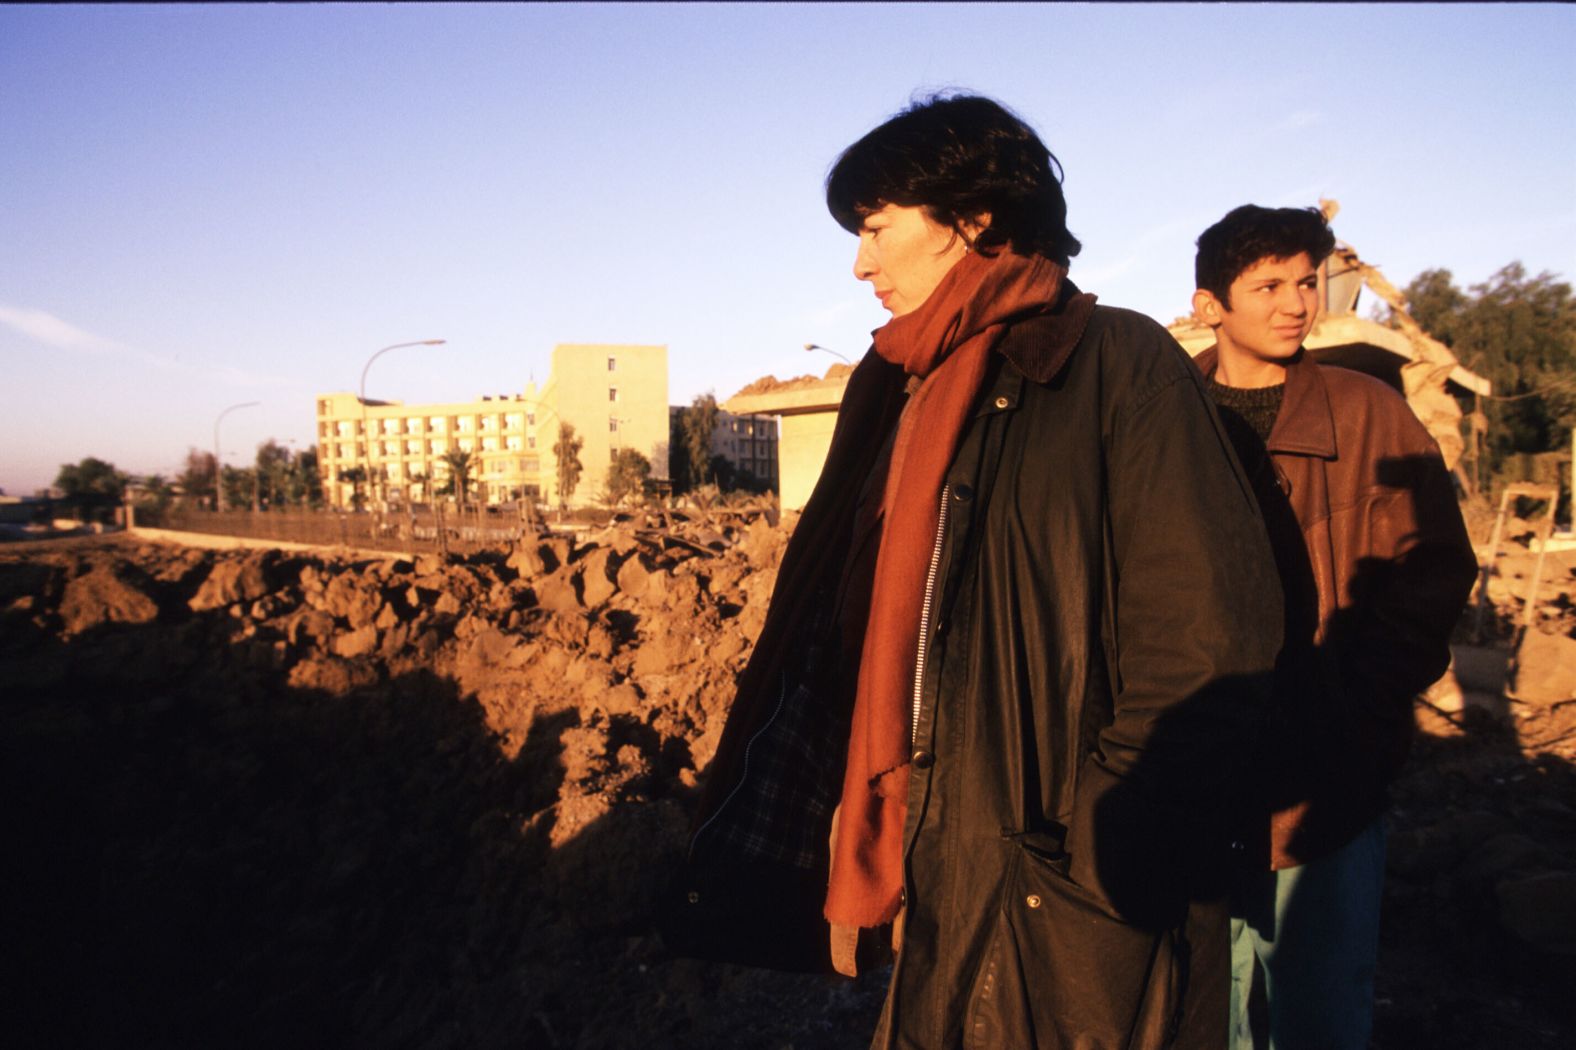 CNN's Chief International Correspondent Christiane Amanpour examines a crater left by a US bombing in Baghdad, Iraq, in December 1998.